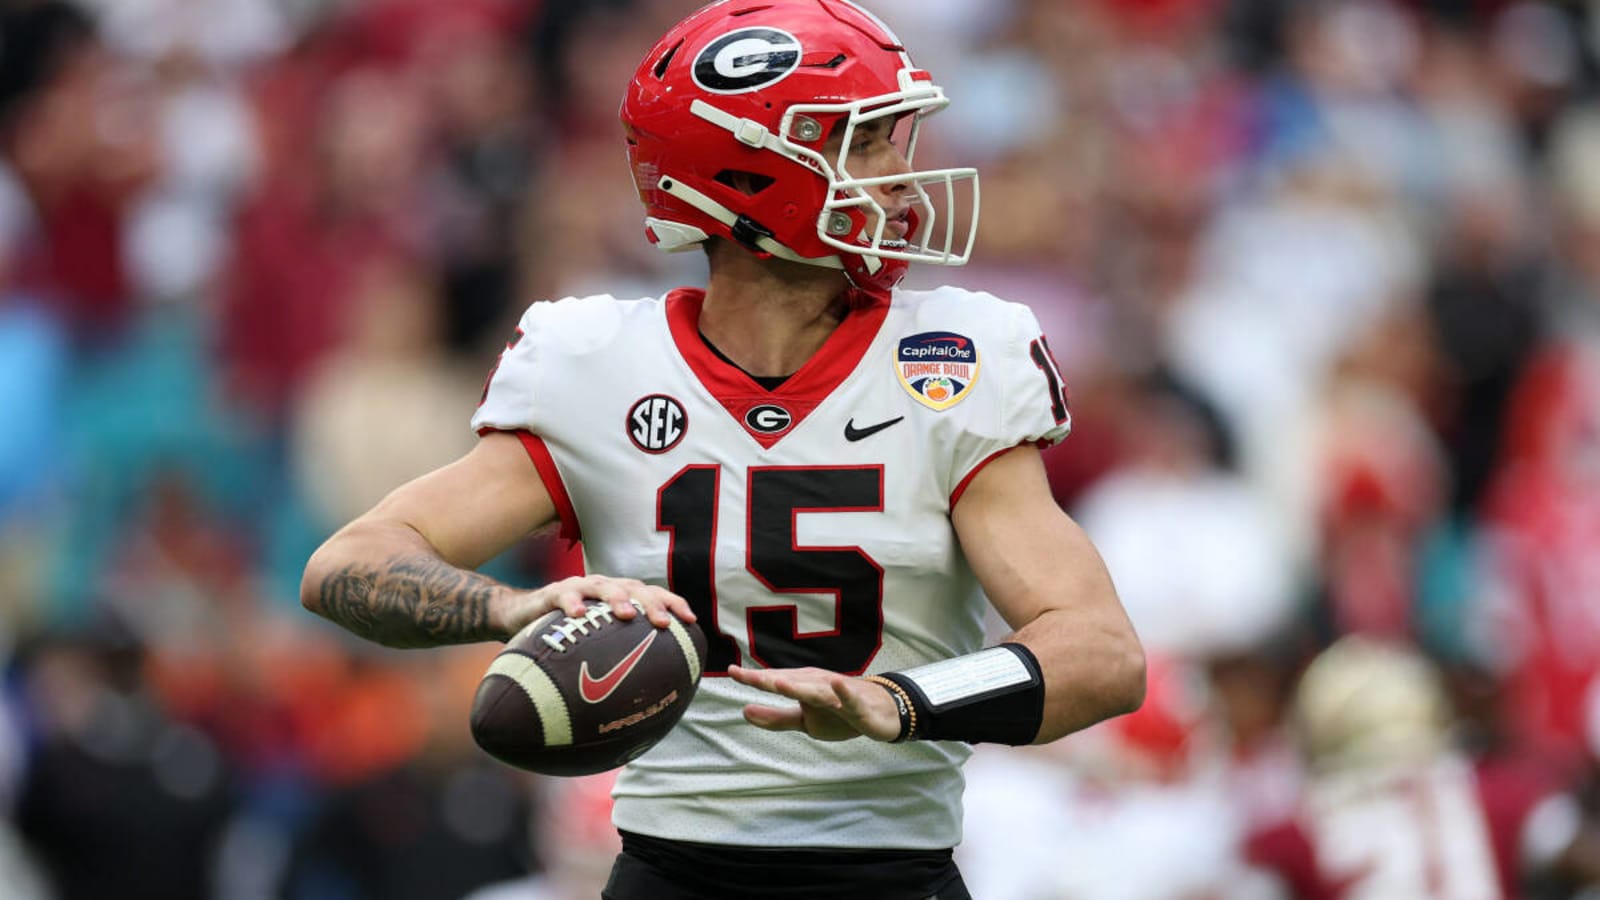 Georgia QB Carson Beck talks in-helmet communication that could be headed to FBS